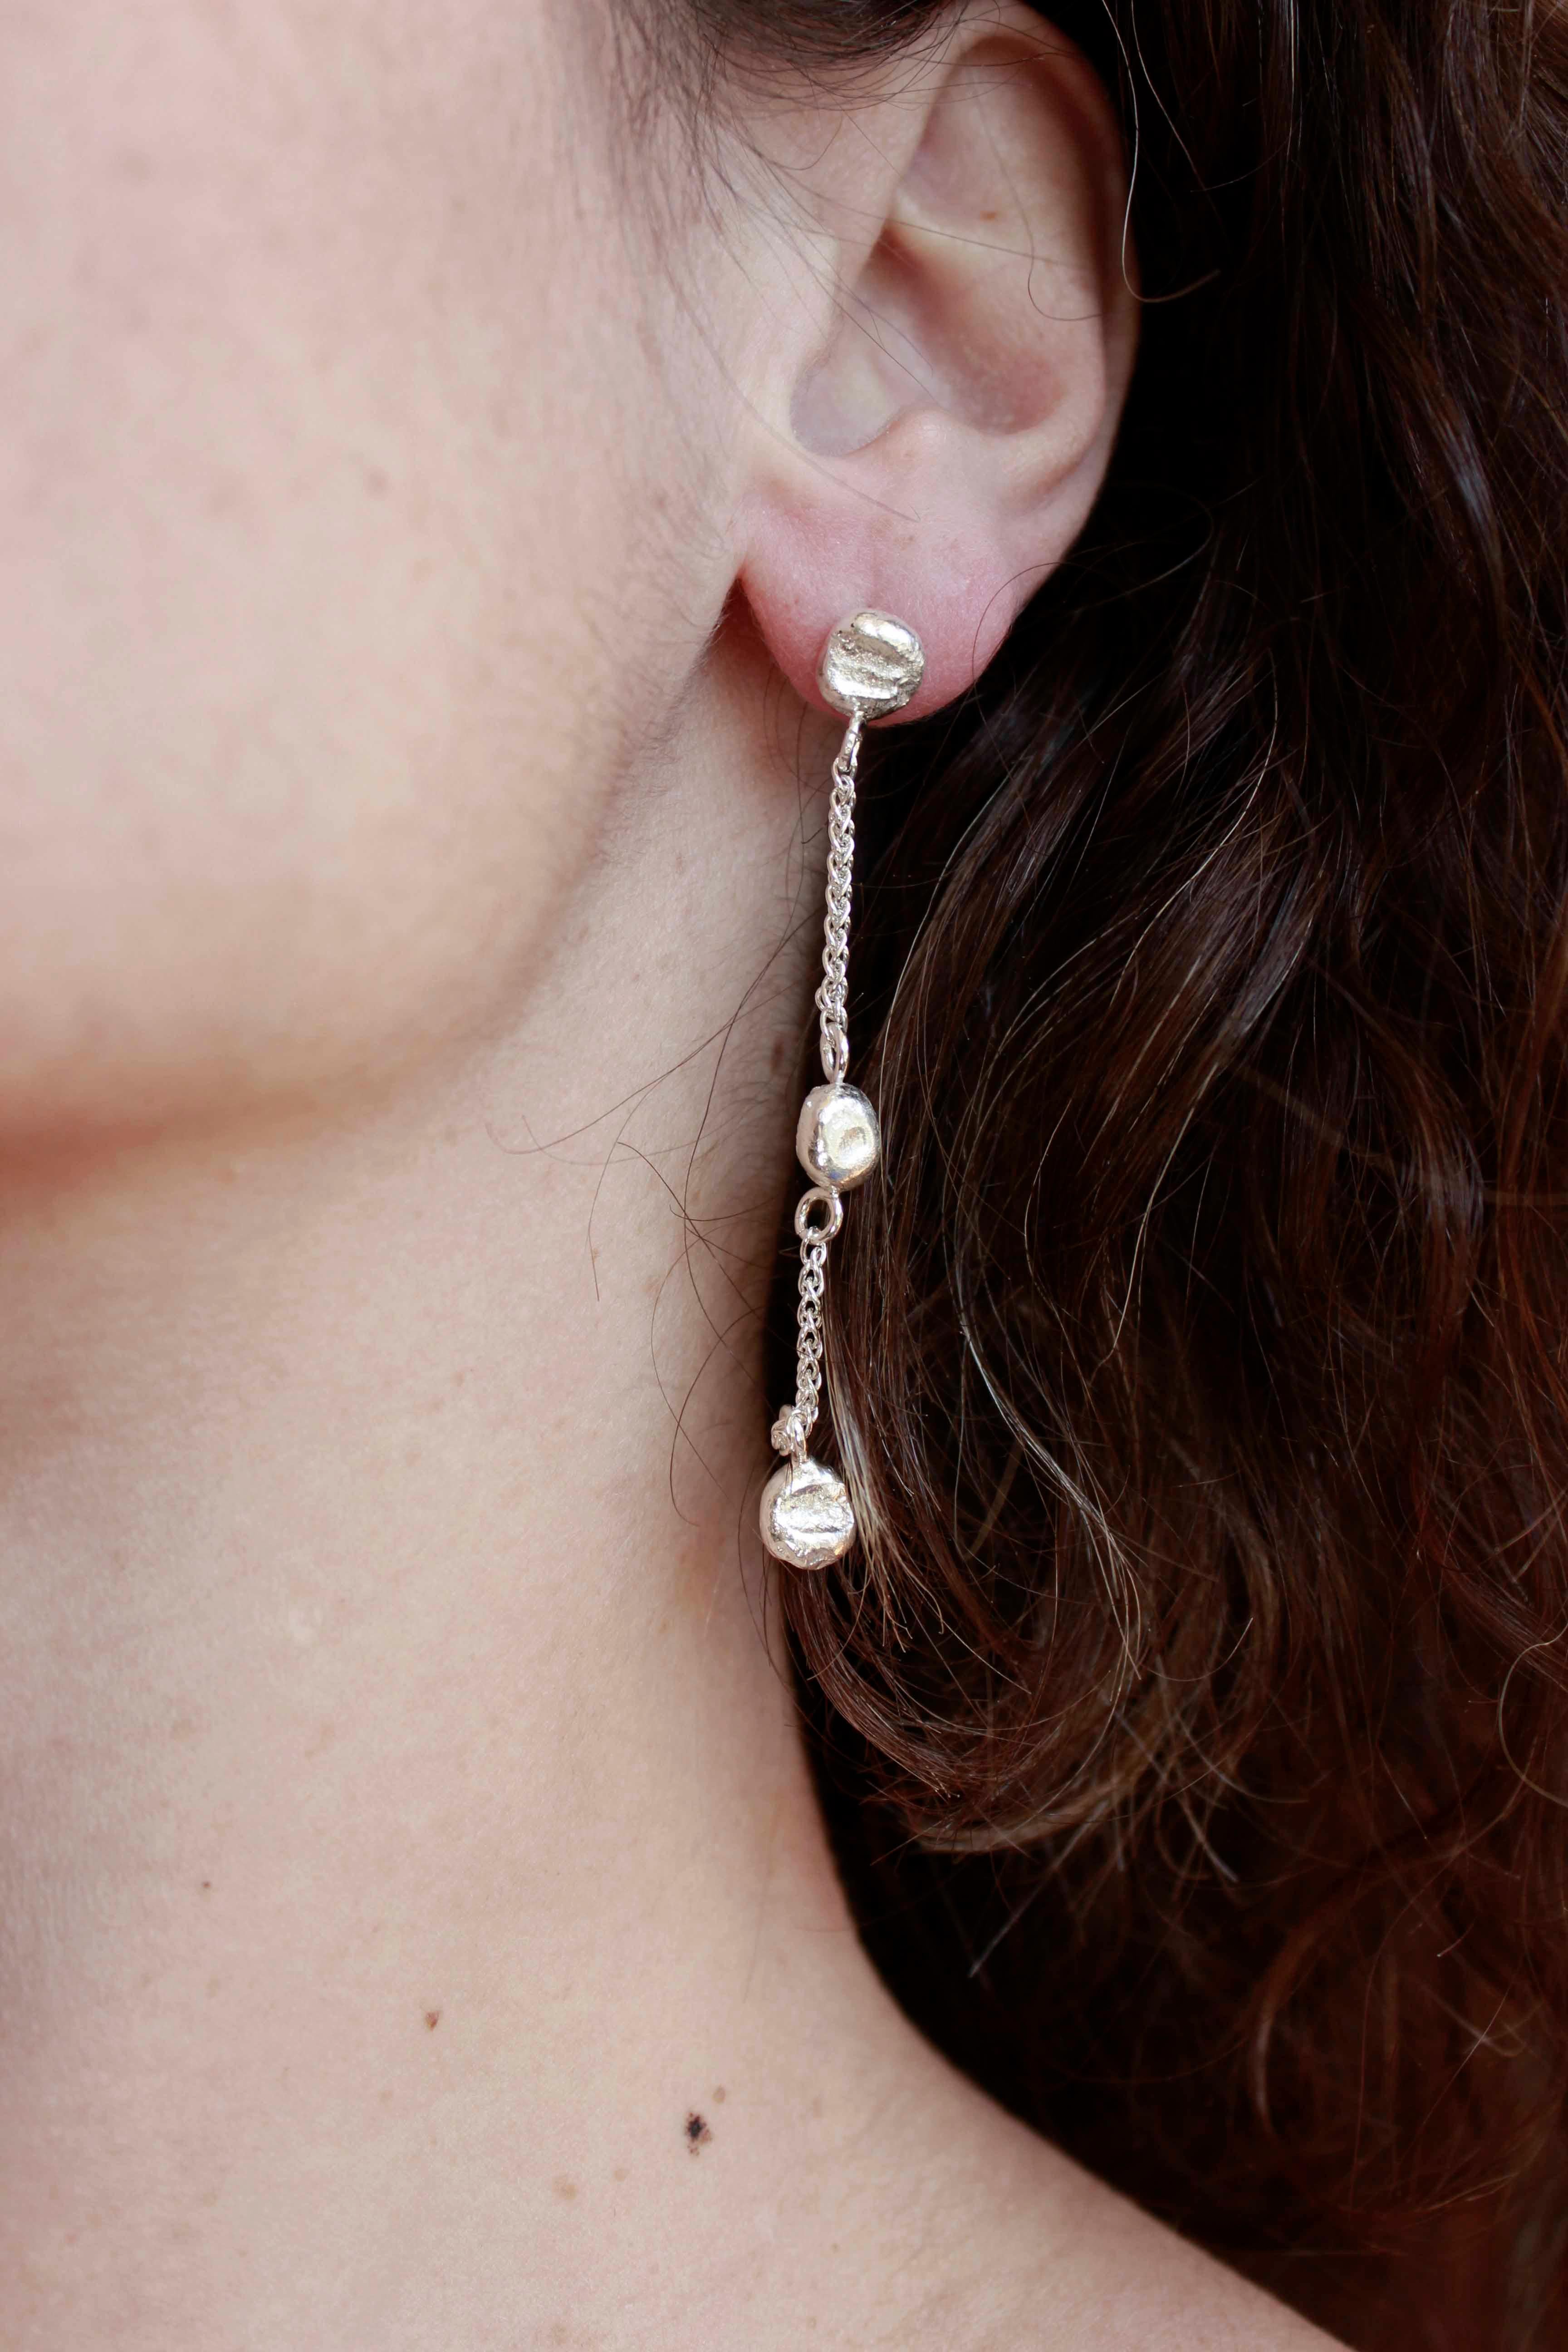 Simple and elegant, the Dione Earrings consist of three silver balls each, combined with silver chain.

Each earring has approximately 6.5cm length.

The small organic balls are made from our silver scrap, which means they are 100% recycled and